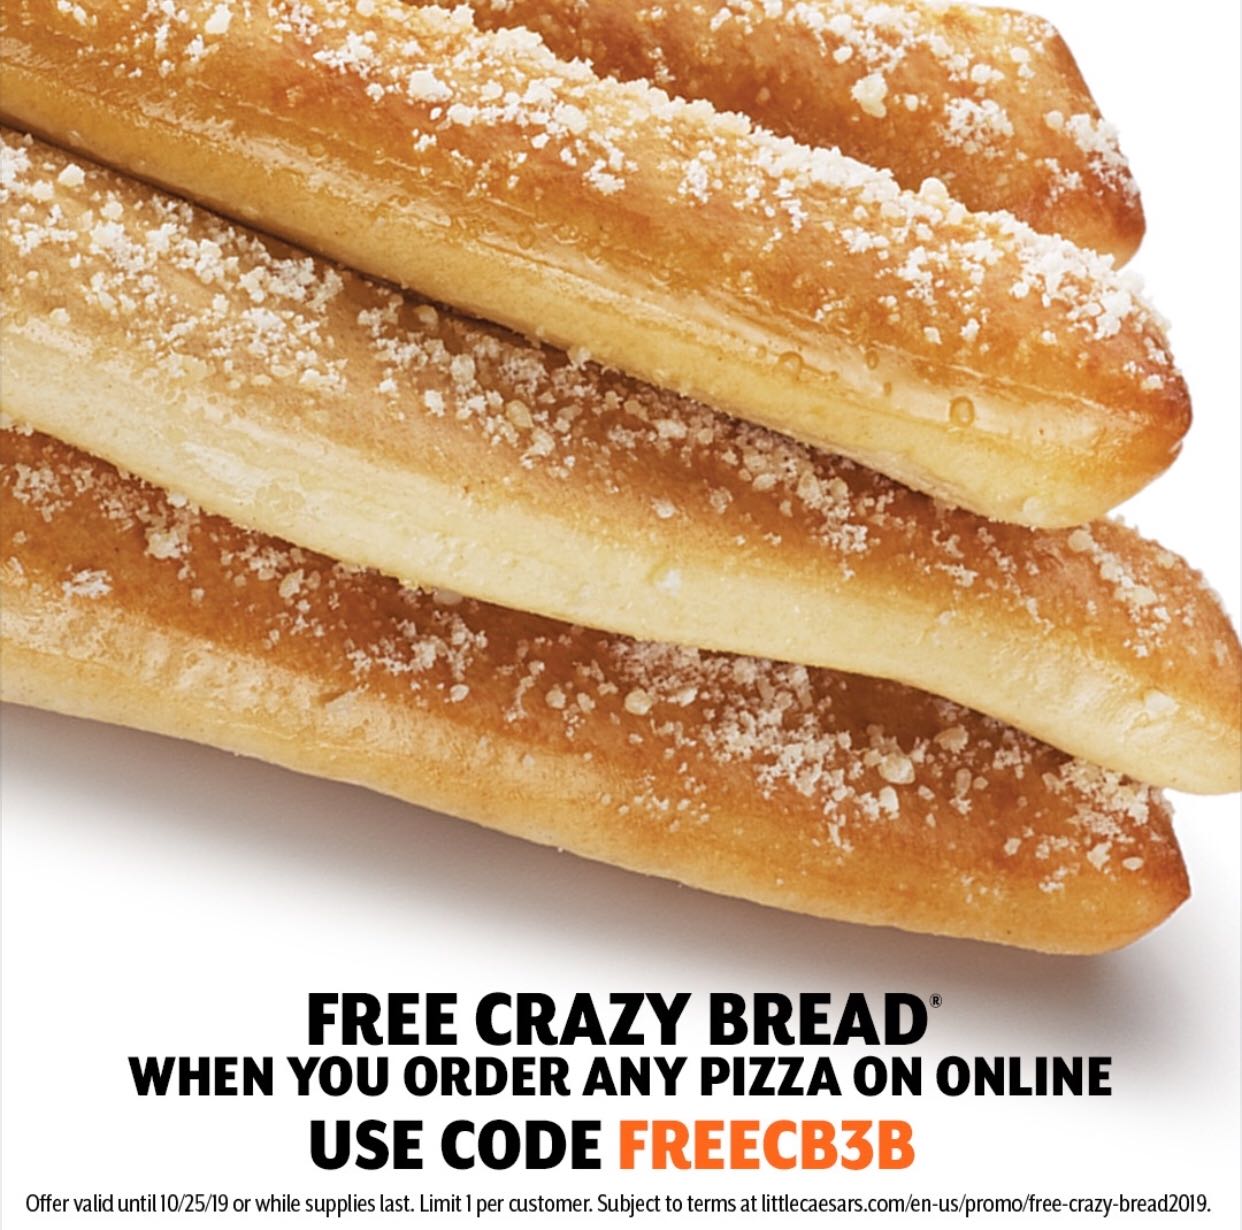 Get a FREE Crazy Bread with pizza order at Little Caesars Clark Deals